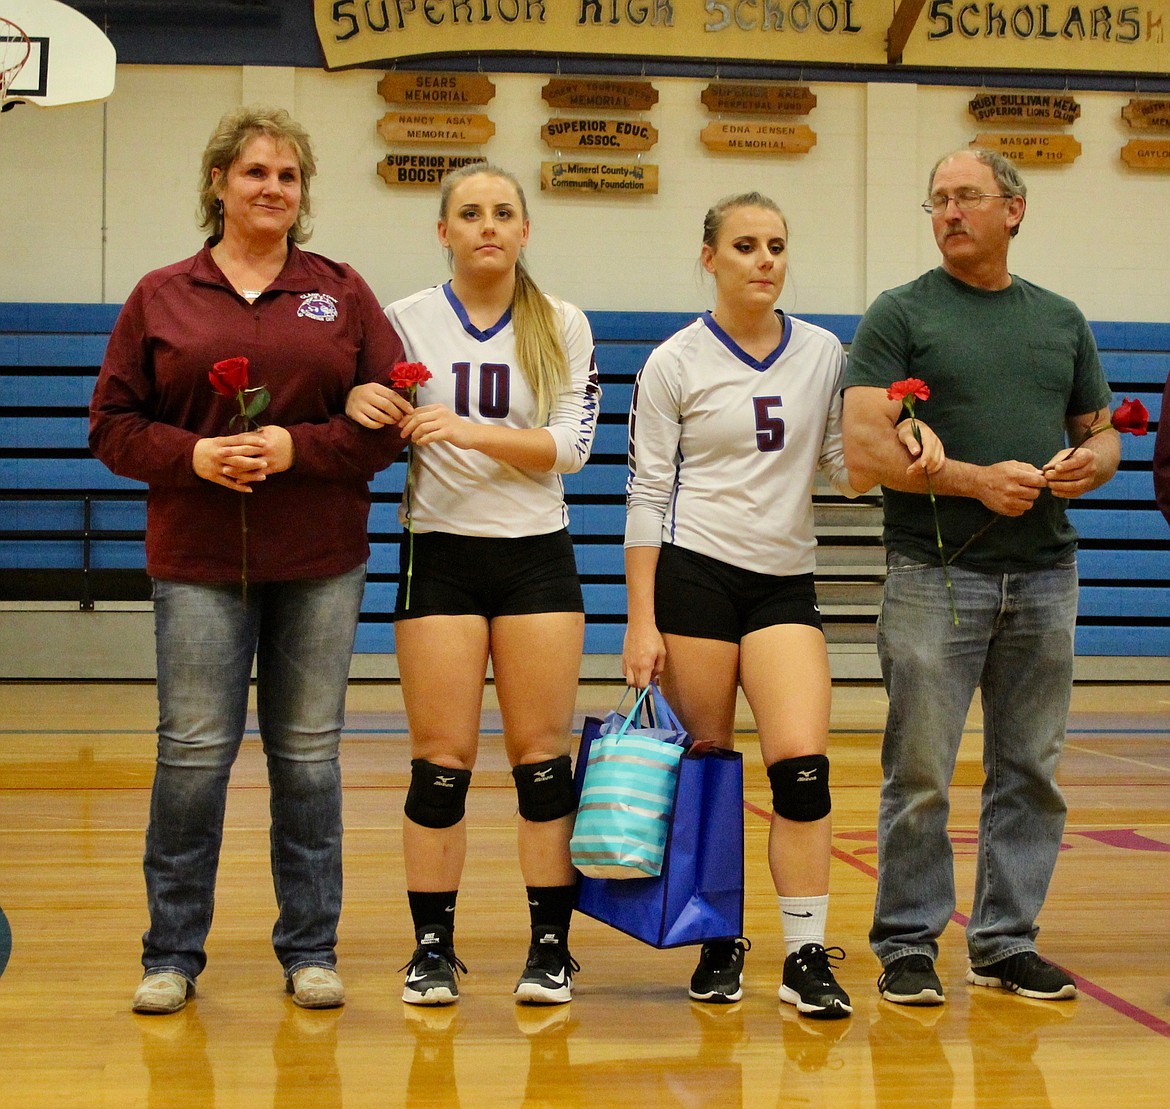 Superior sisters Kathryn (#5) and Margaret (#10) Parkin were escorted by their parents, Michelle and Richard during Senior Night last week. (Photo courtesy of Frankie Kelly)